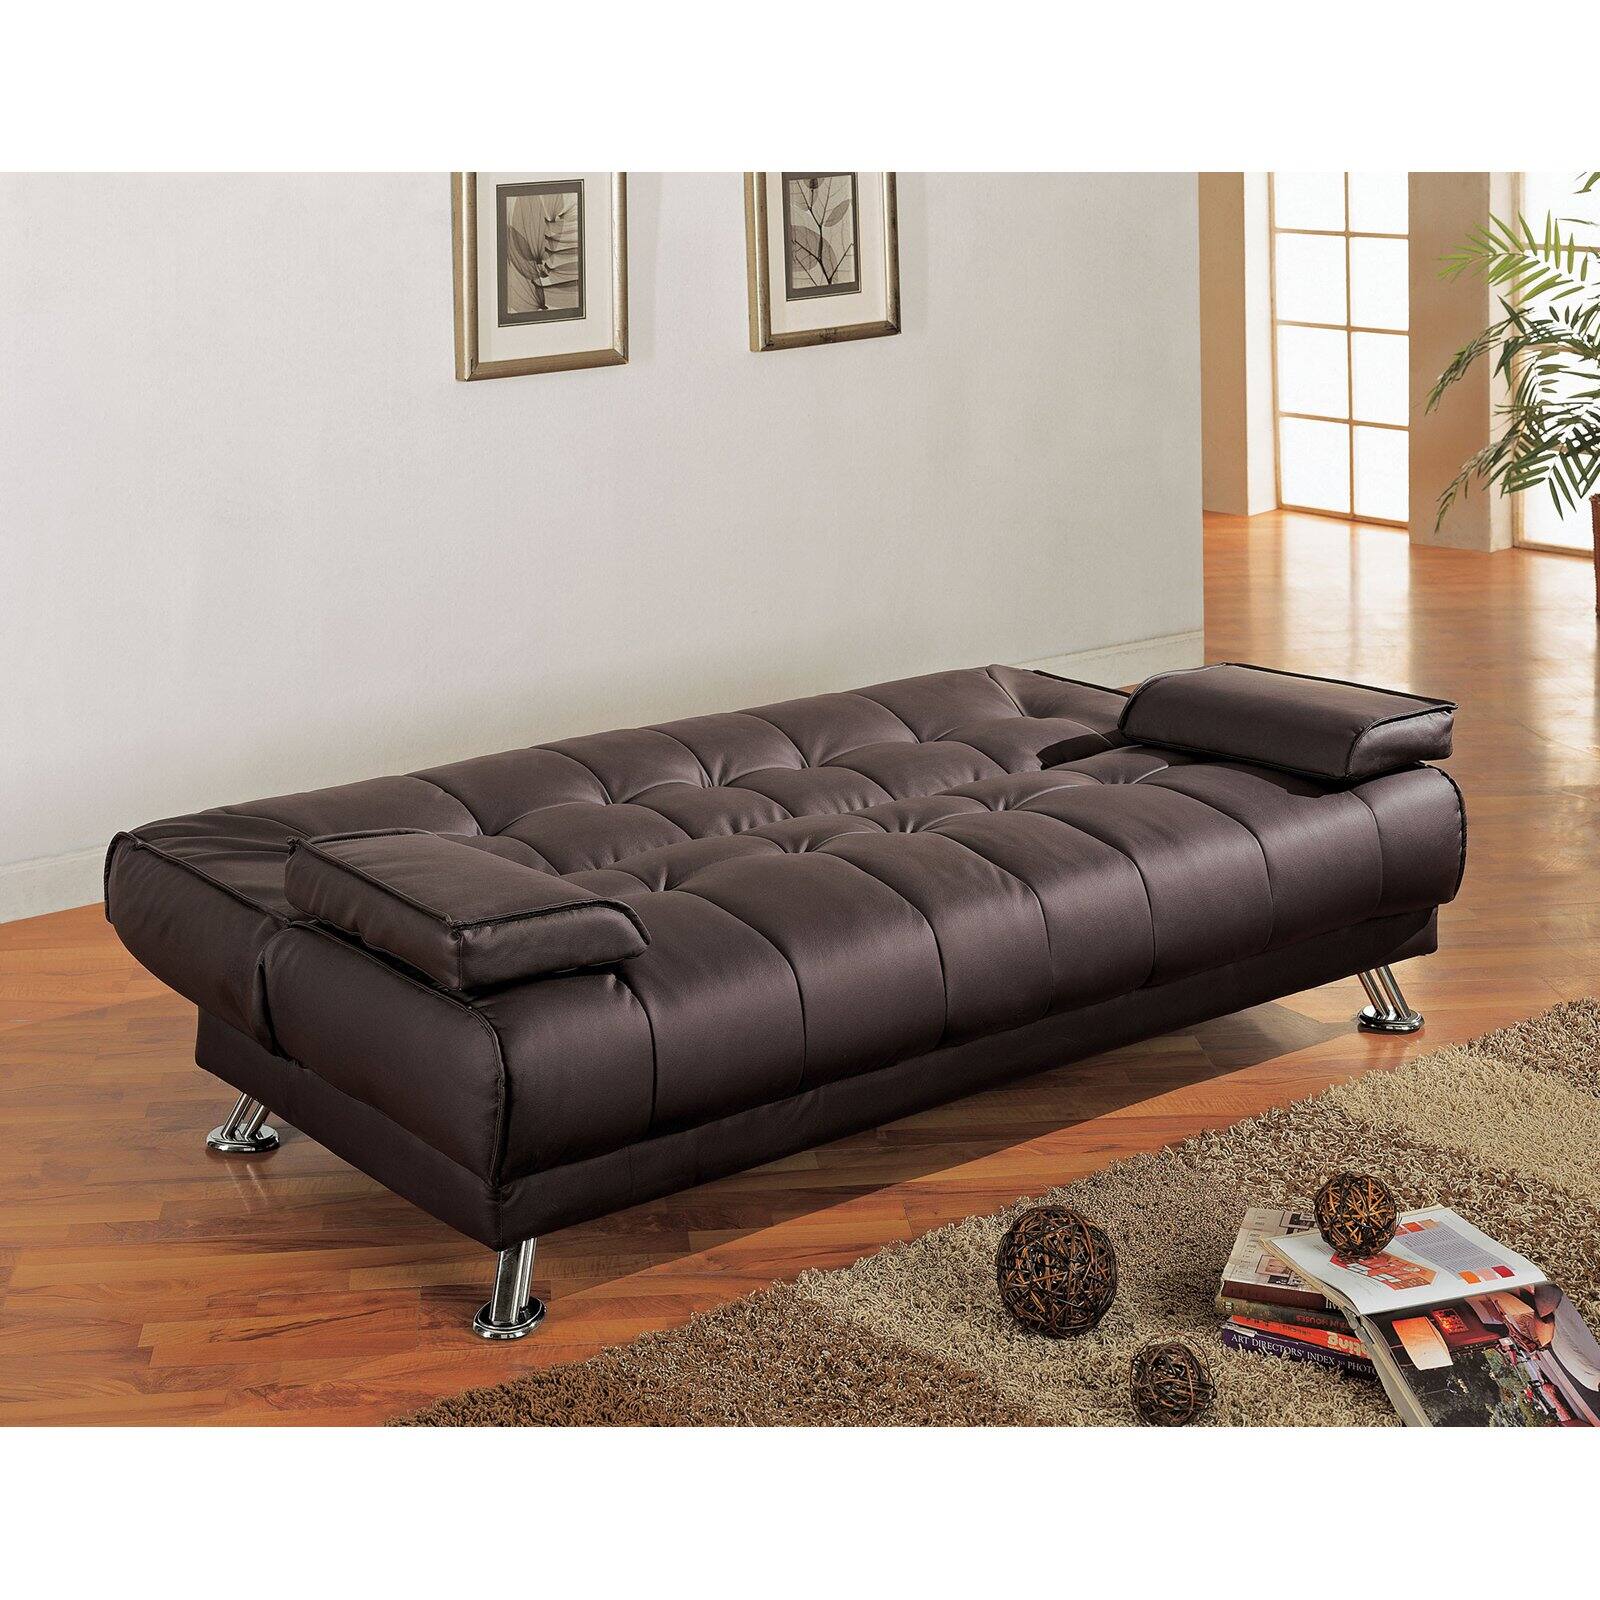 Braxton Leatherette Sofa Bed, Brown - image 3 of 4